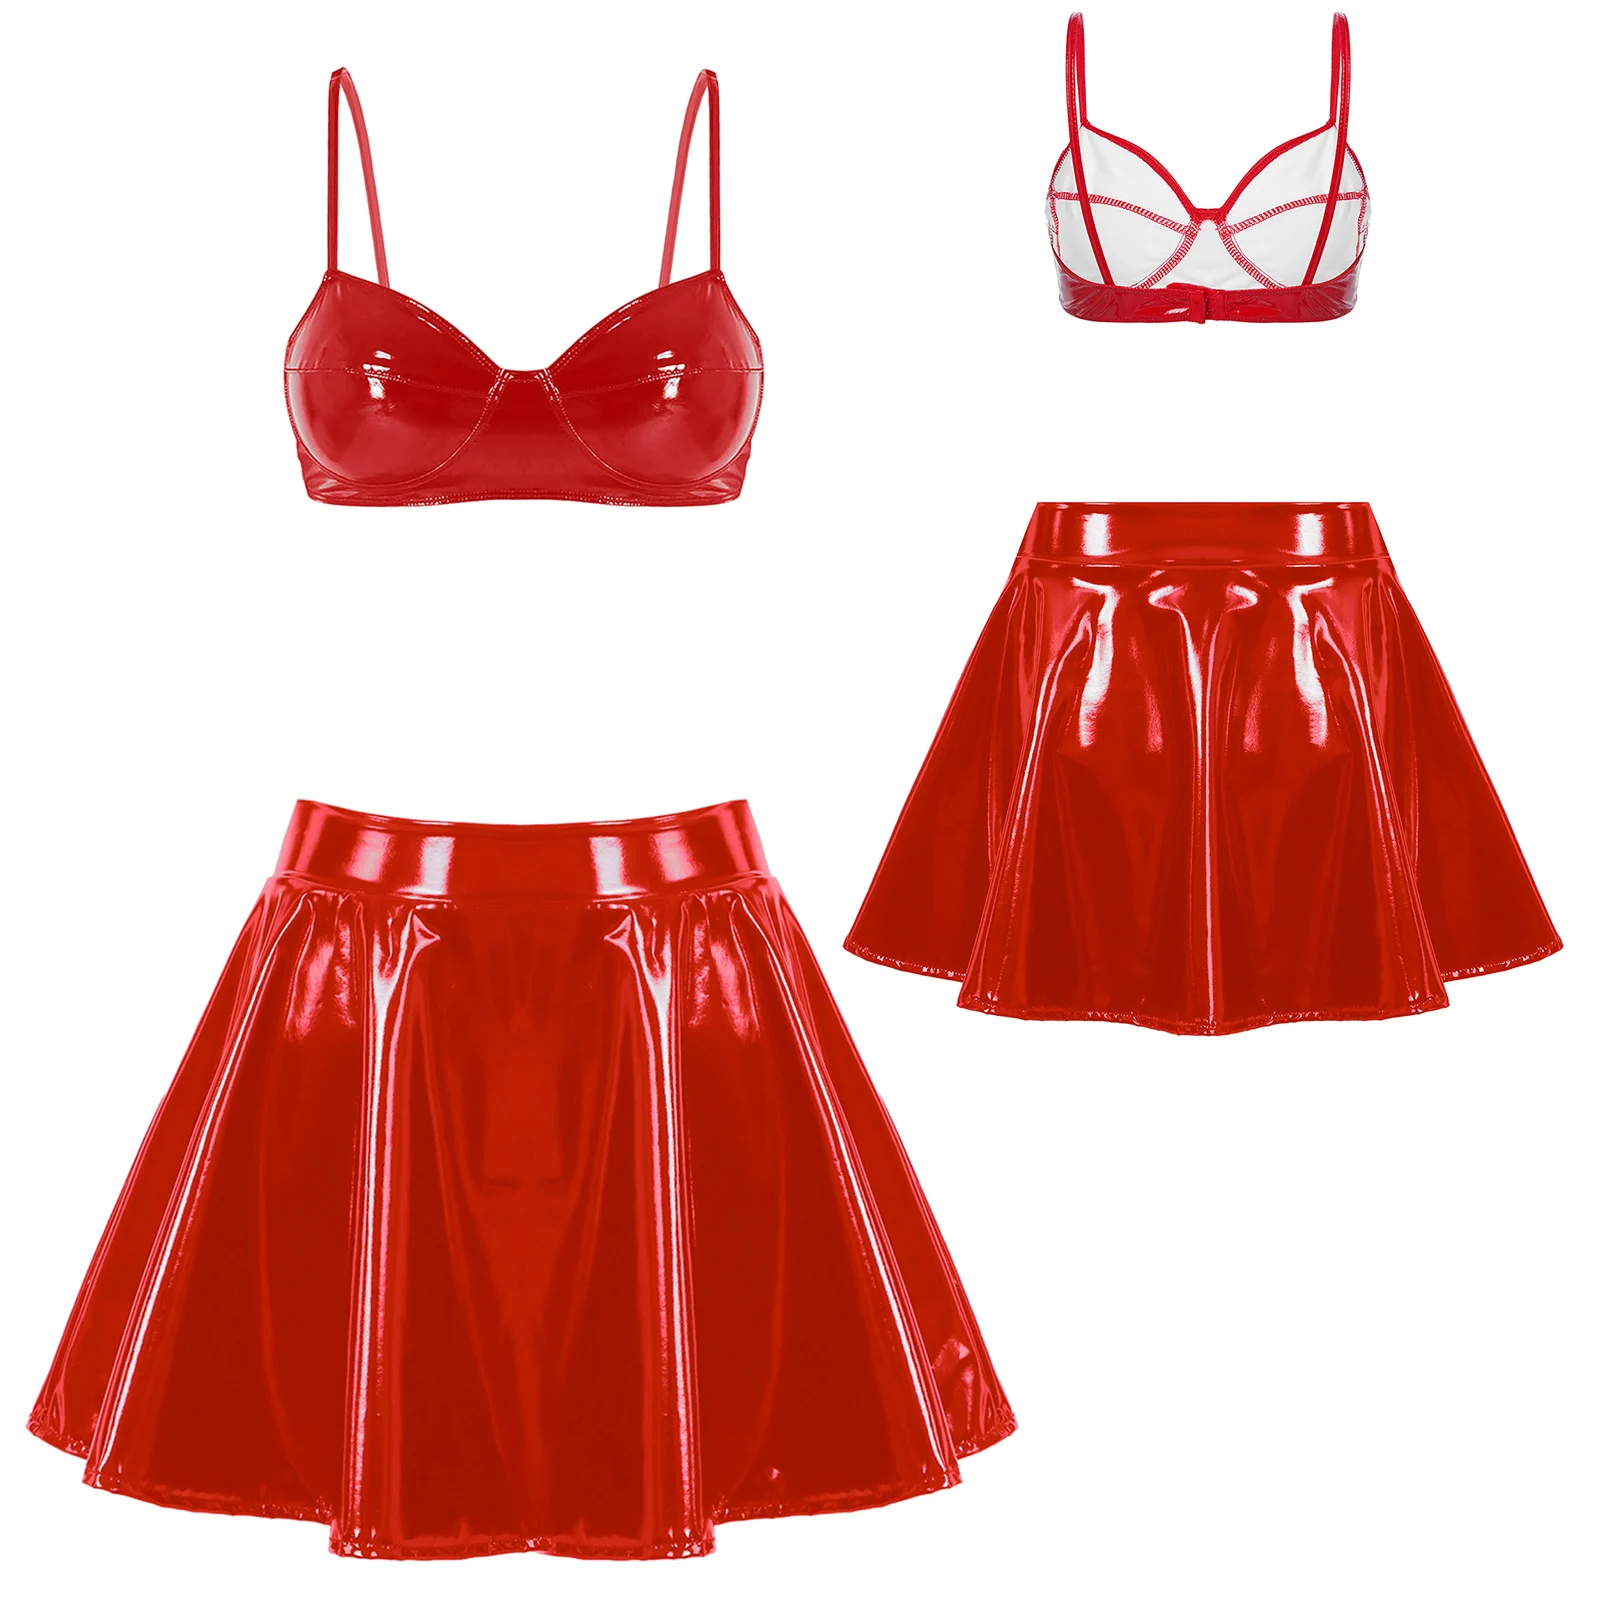 

Womens Wet Look Patent Leather Set Wire-free Bra Top with Zipper Flared Skirt for Lingerie Night Club